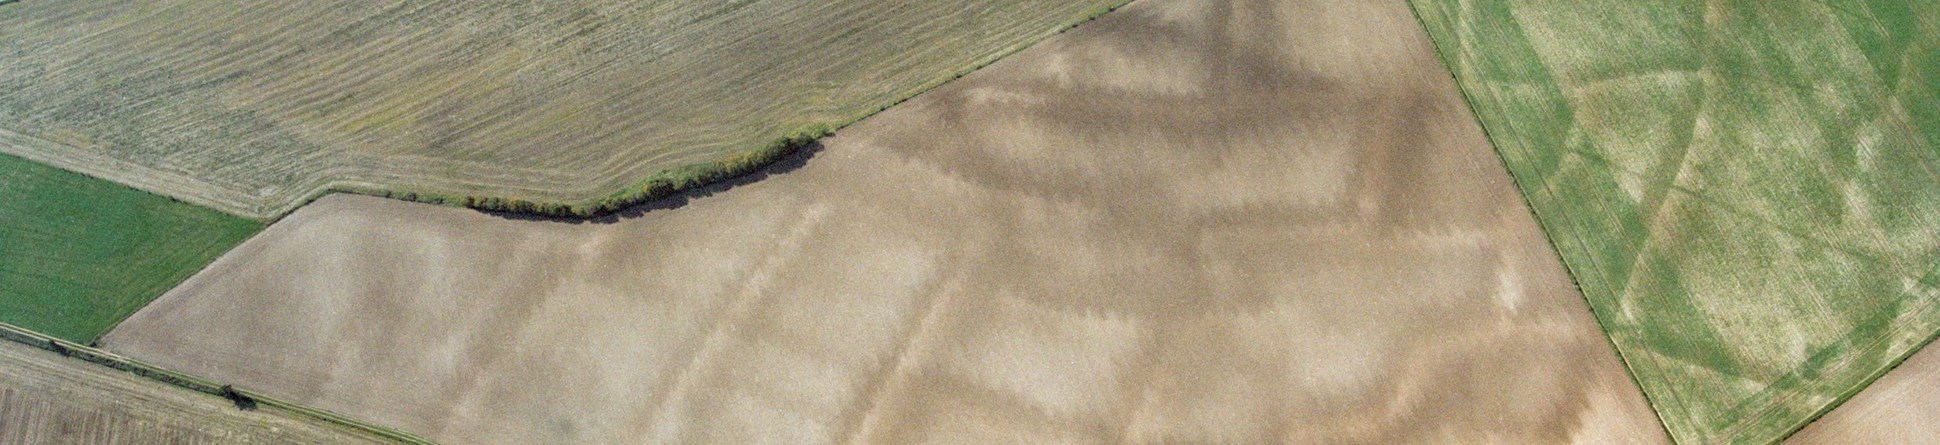 Image of buried archaeology in rural fields visible from aerial photographs